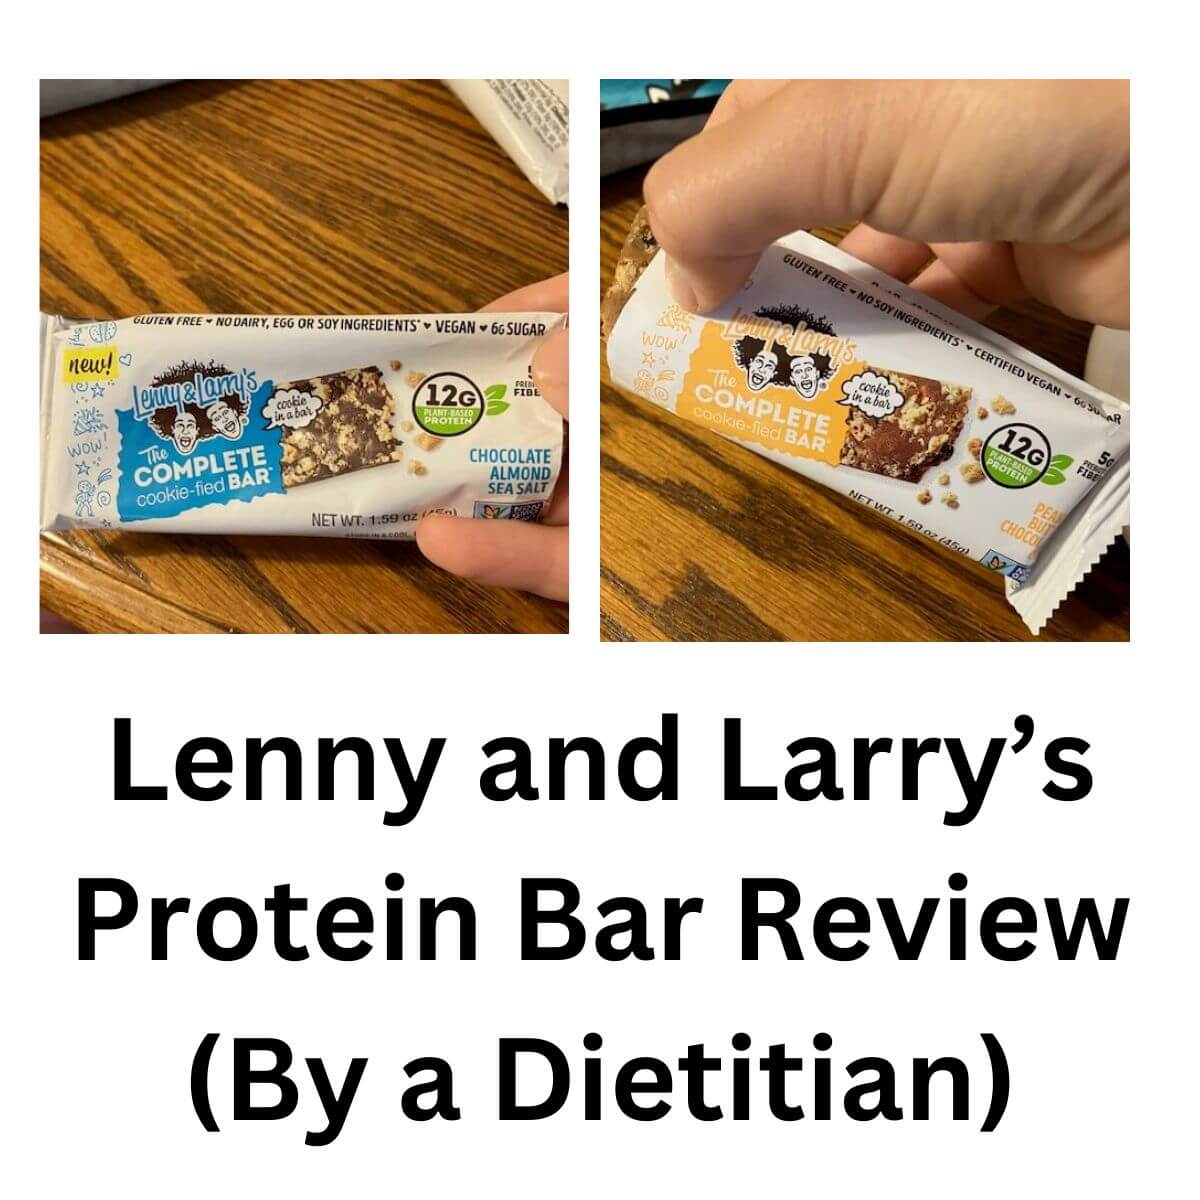 Text reads: Lenny and Larry’s Protein Bar Review (By a Dietitian). There is a picture of two Lenny and Larry's The Complete Cookie Cookie-fied bars.